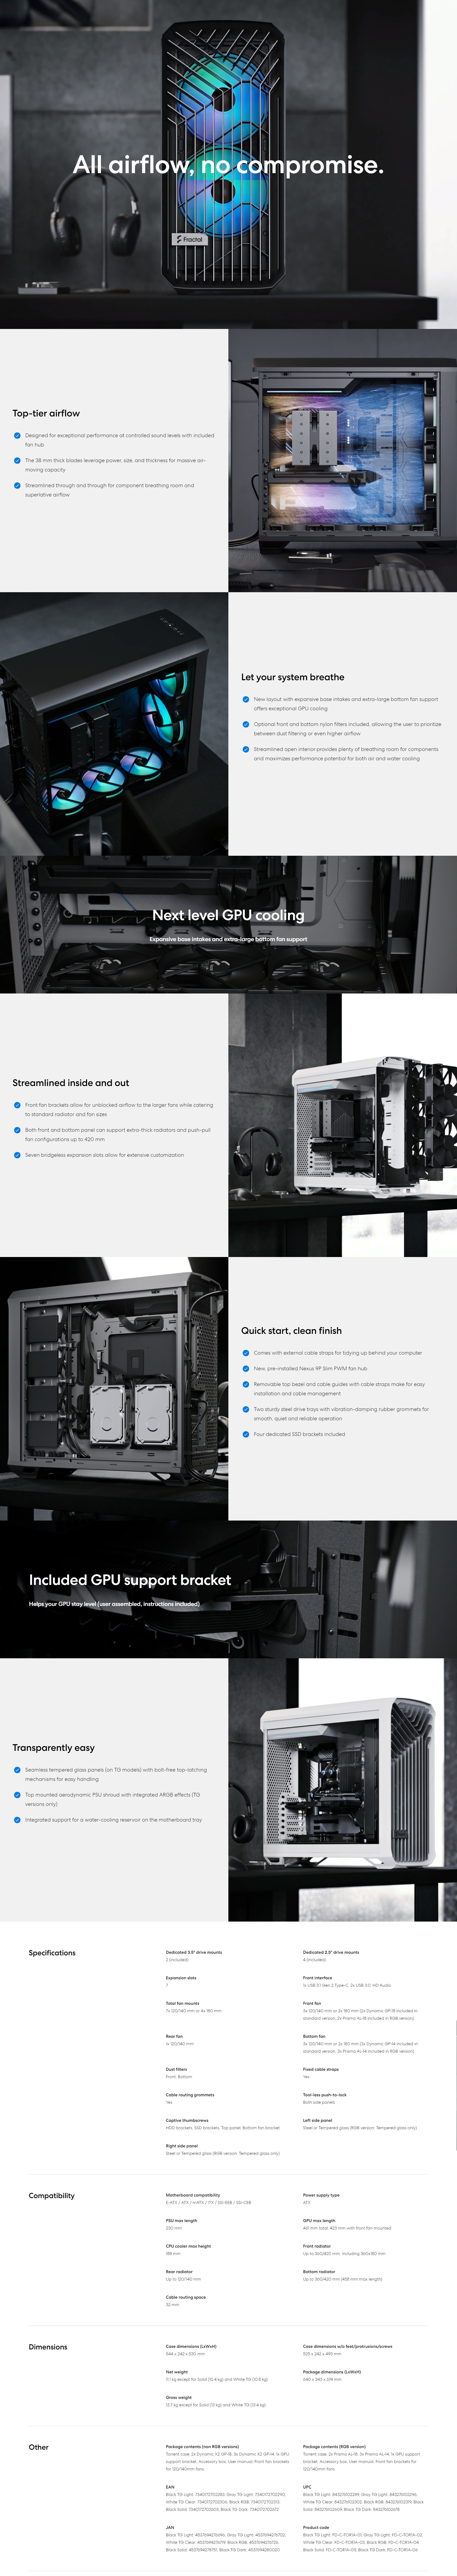 A large marketing image providing additional information about the product Fractal Design Torrent Mid Tower Case - Black - Additional alt info not provided